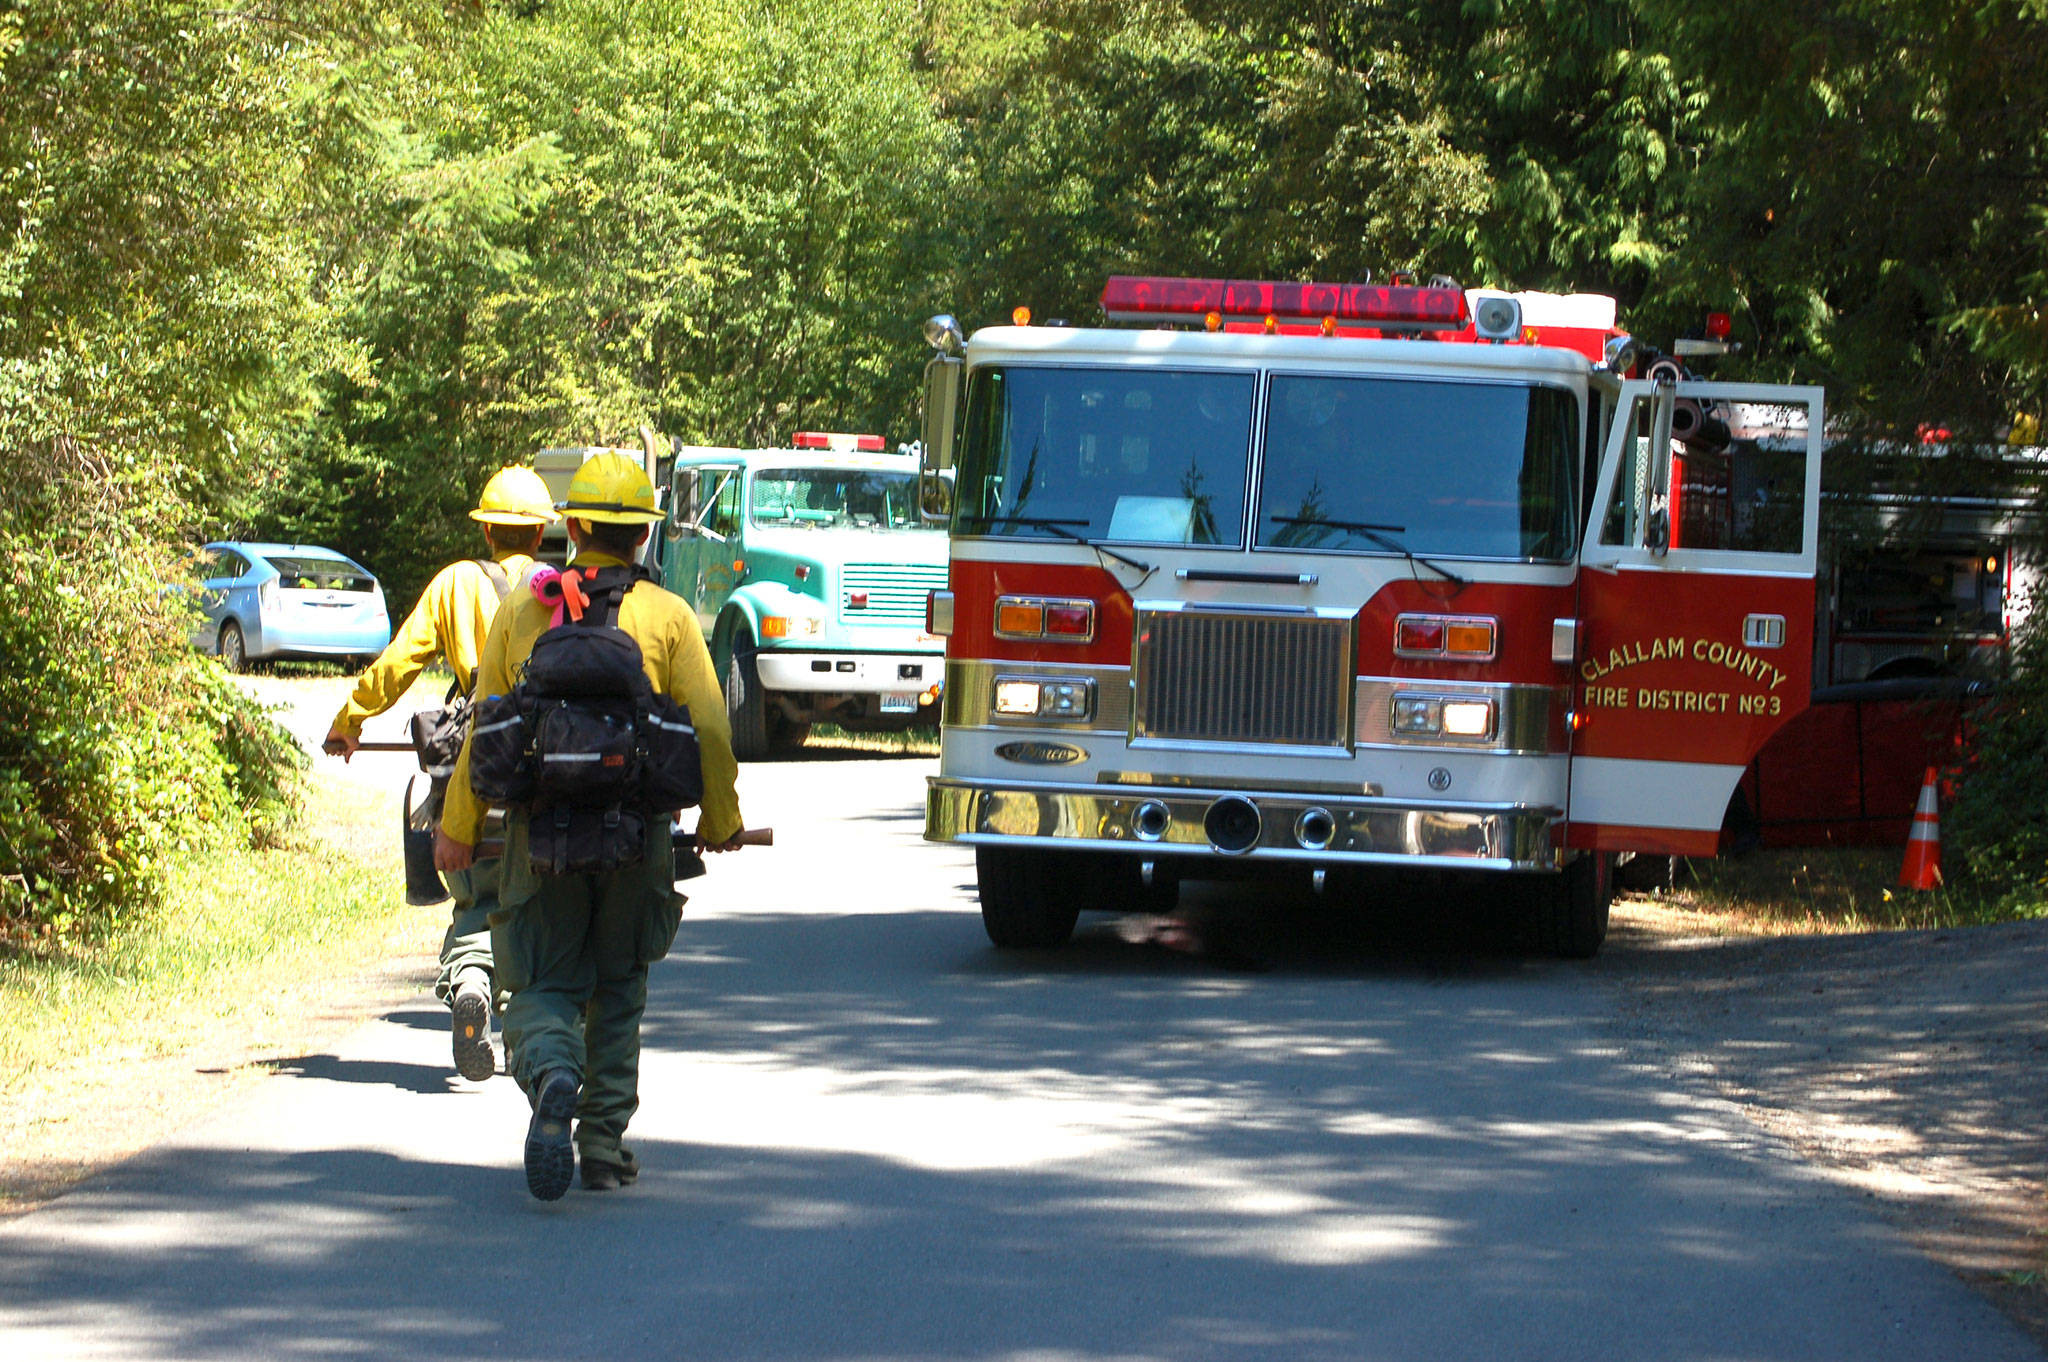 Clallam County Fire District No. 3 and the Department of Natural Resources responded to a brush fire near East Sequim Bay Road on July 25. The fire was contained to less than an acre by 1:30 p.m. and the cause is under investigation. Sequim Gazette photo by Erin Hawkins